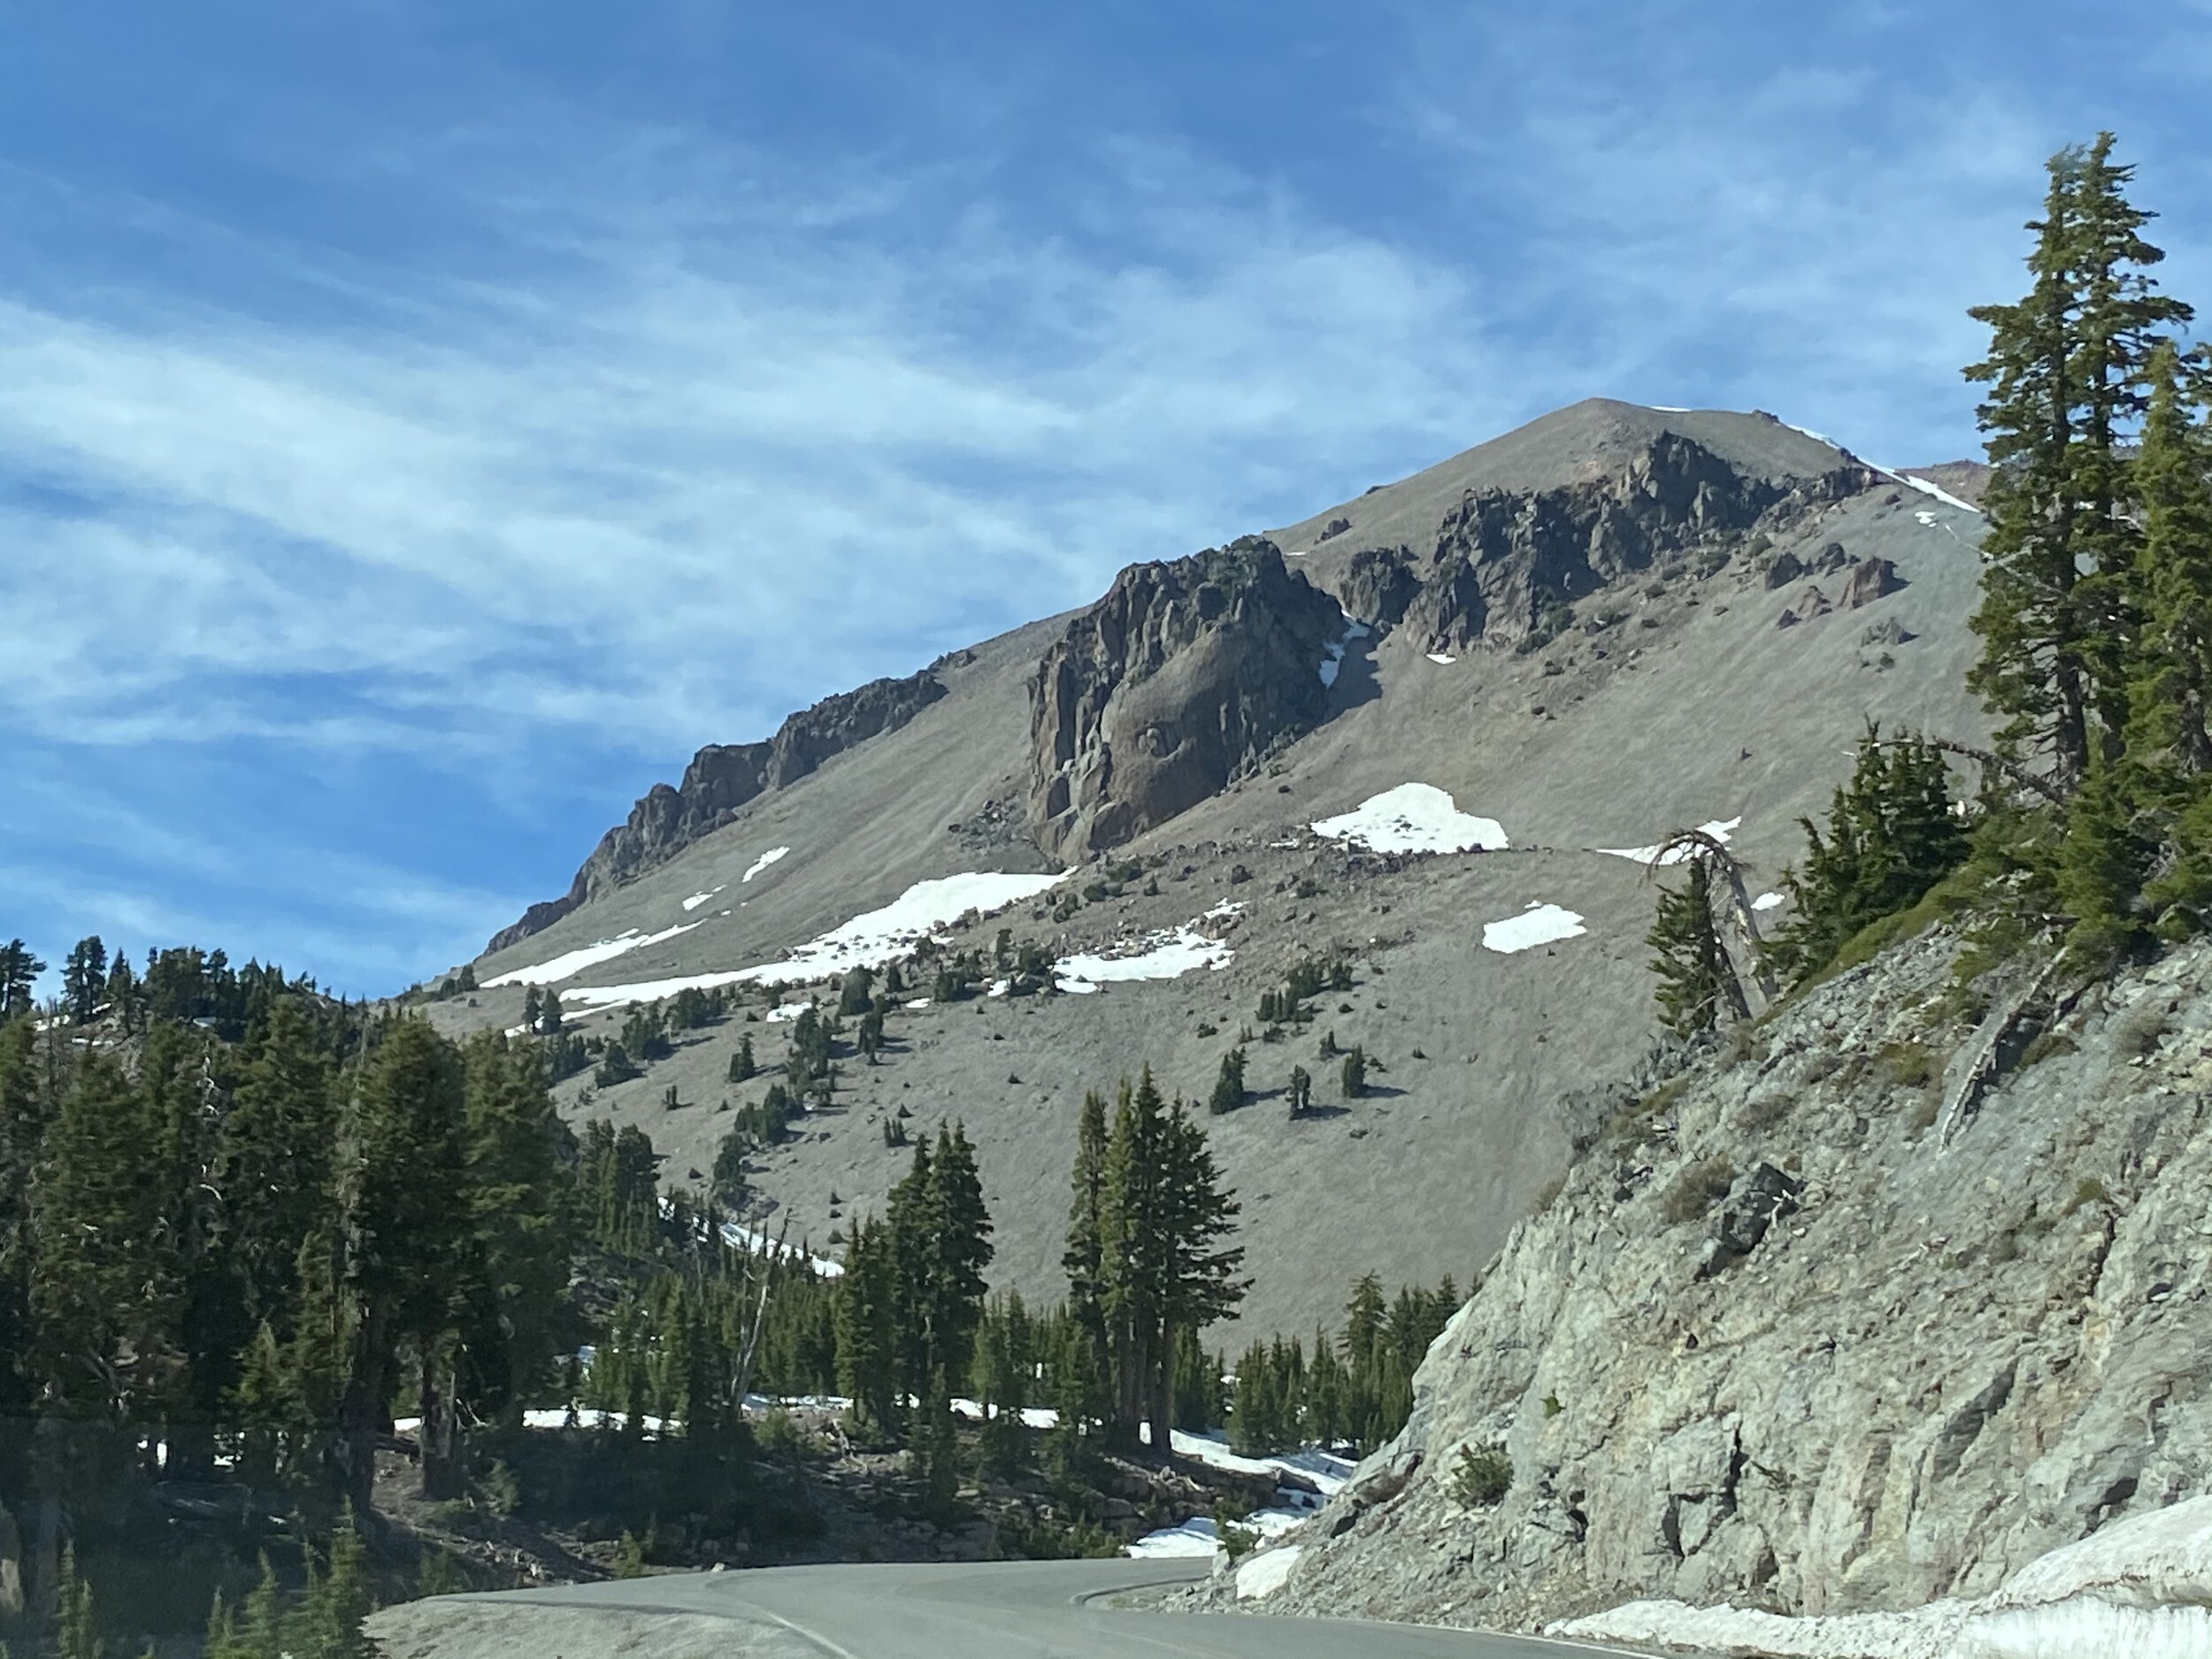 “If you look toward the south face of Lassen Peak, near the top, you will see a steep-sided, jagged, castle-like lava formation made up of pines of silica-rich dacite lava.  This feature is almost 500 feet tall and 500 feet wide.  Look closer.  Weathering on the rock face resembles an eye.  Some call it Vulcan’s Eye, after Vulcan, the Roman god of fire after whom volcanoes are named.” - Visitor’s Center display.  Photo by Karen Boudreaux, June 5, 2021